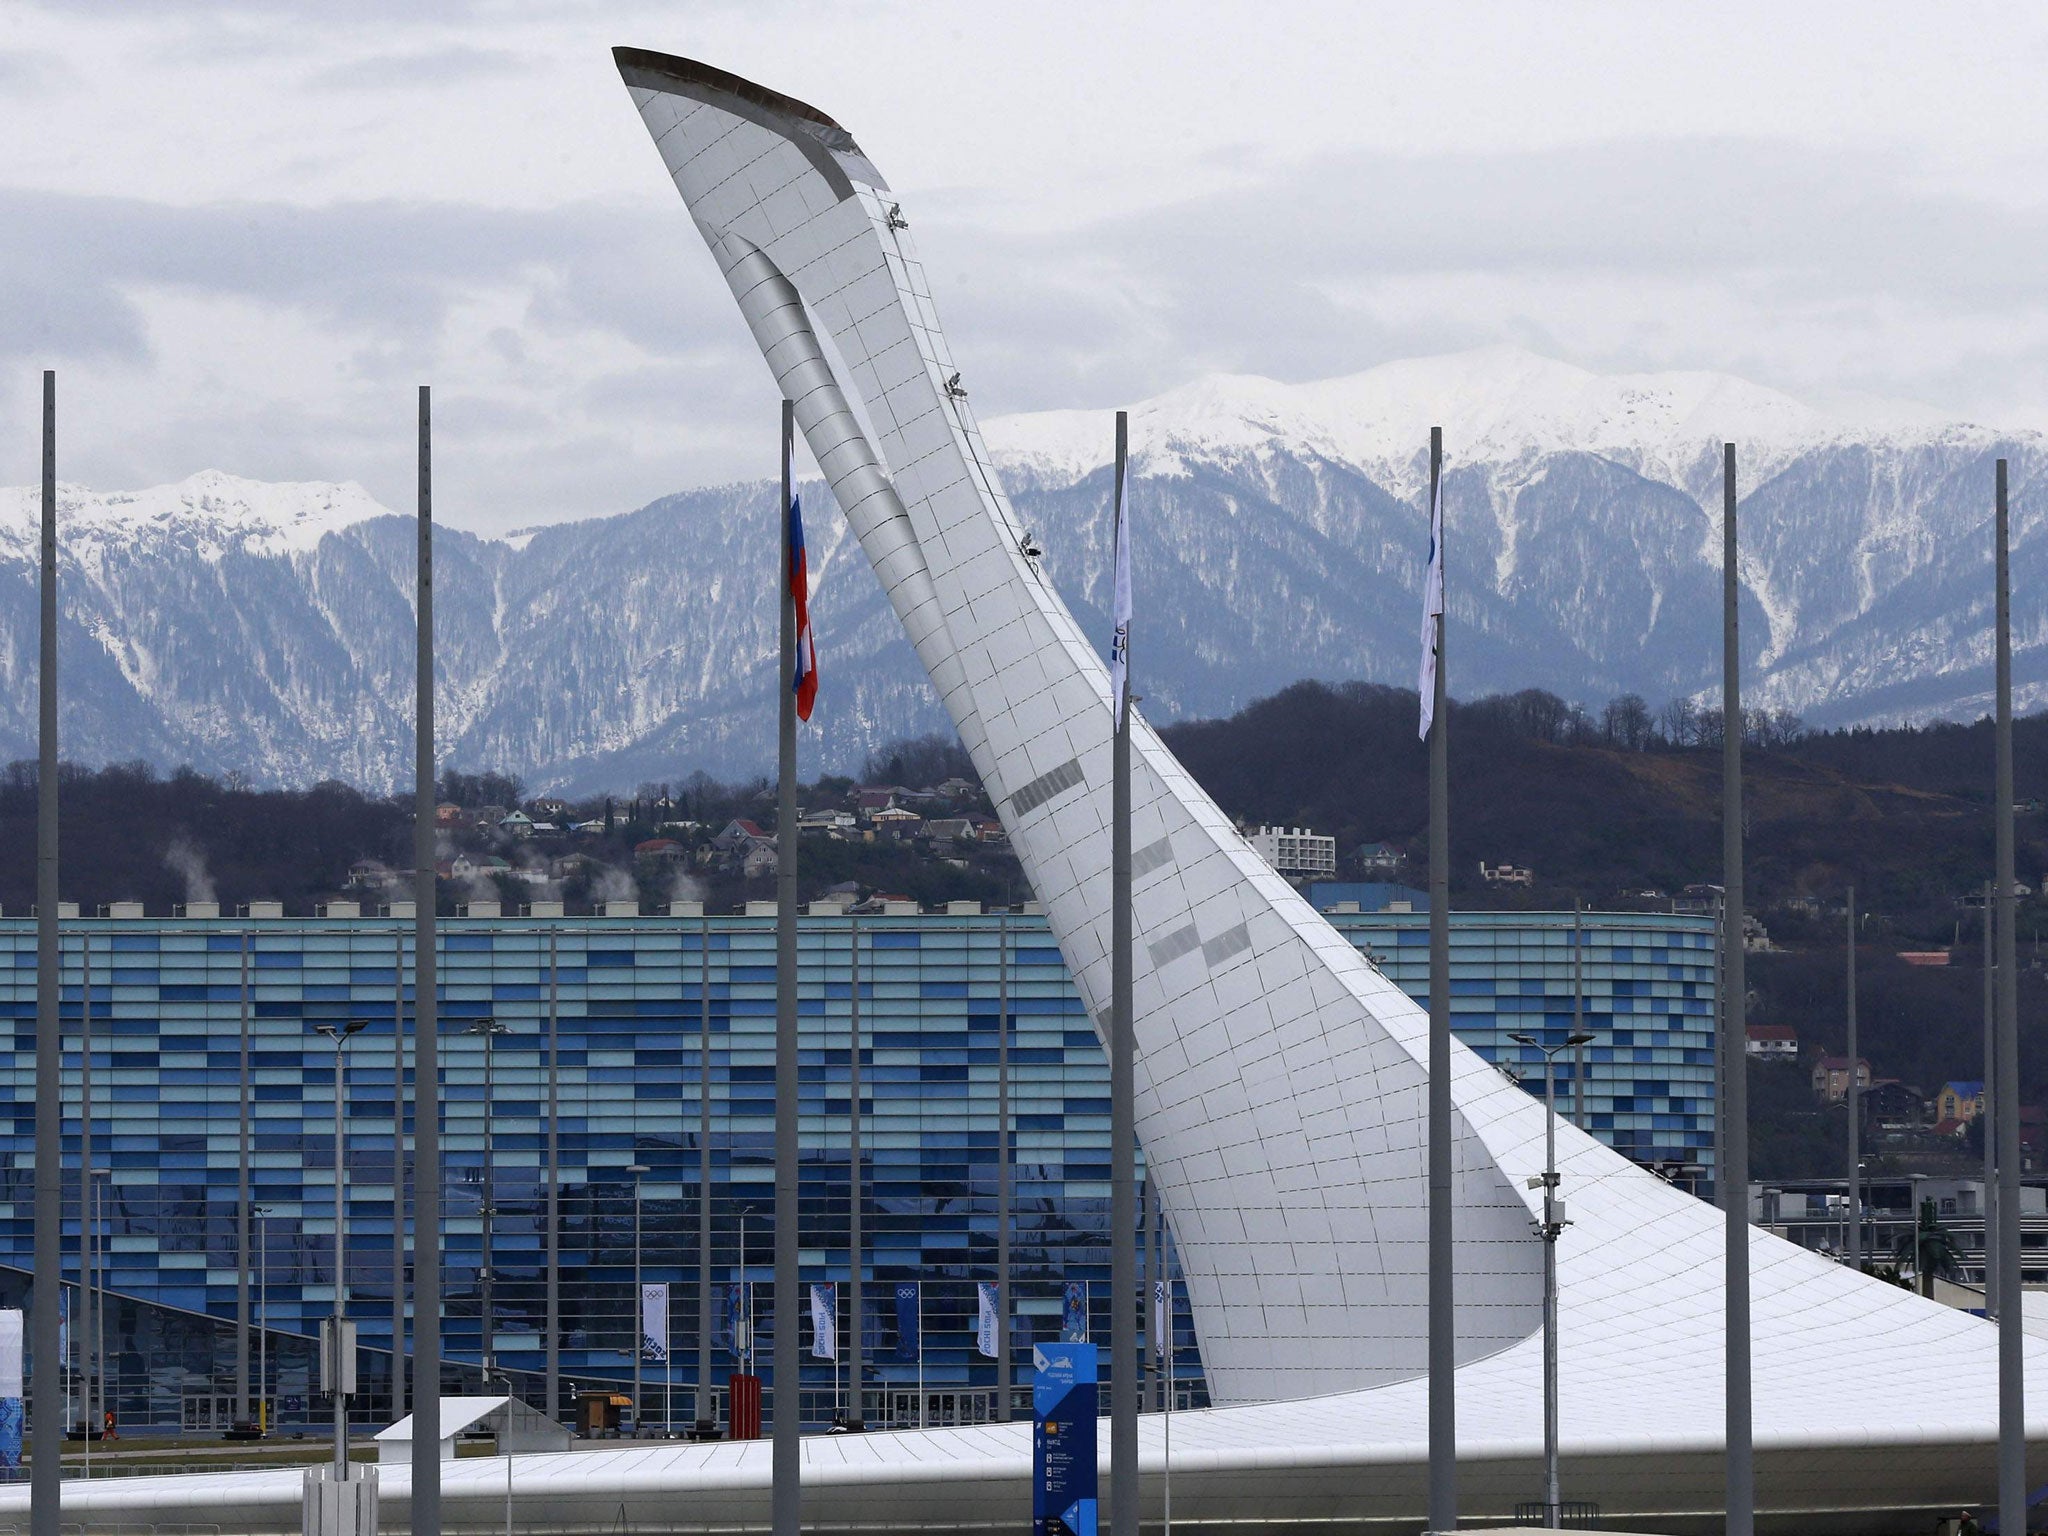 With 11 days to go, Sochi is ready. But controversy surrounding the Games refuses to go away